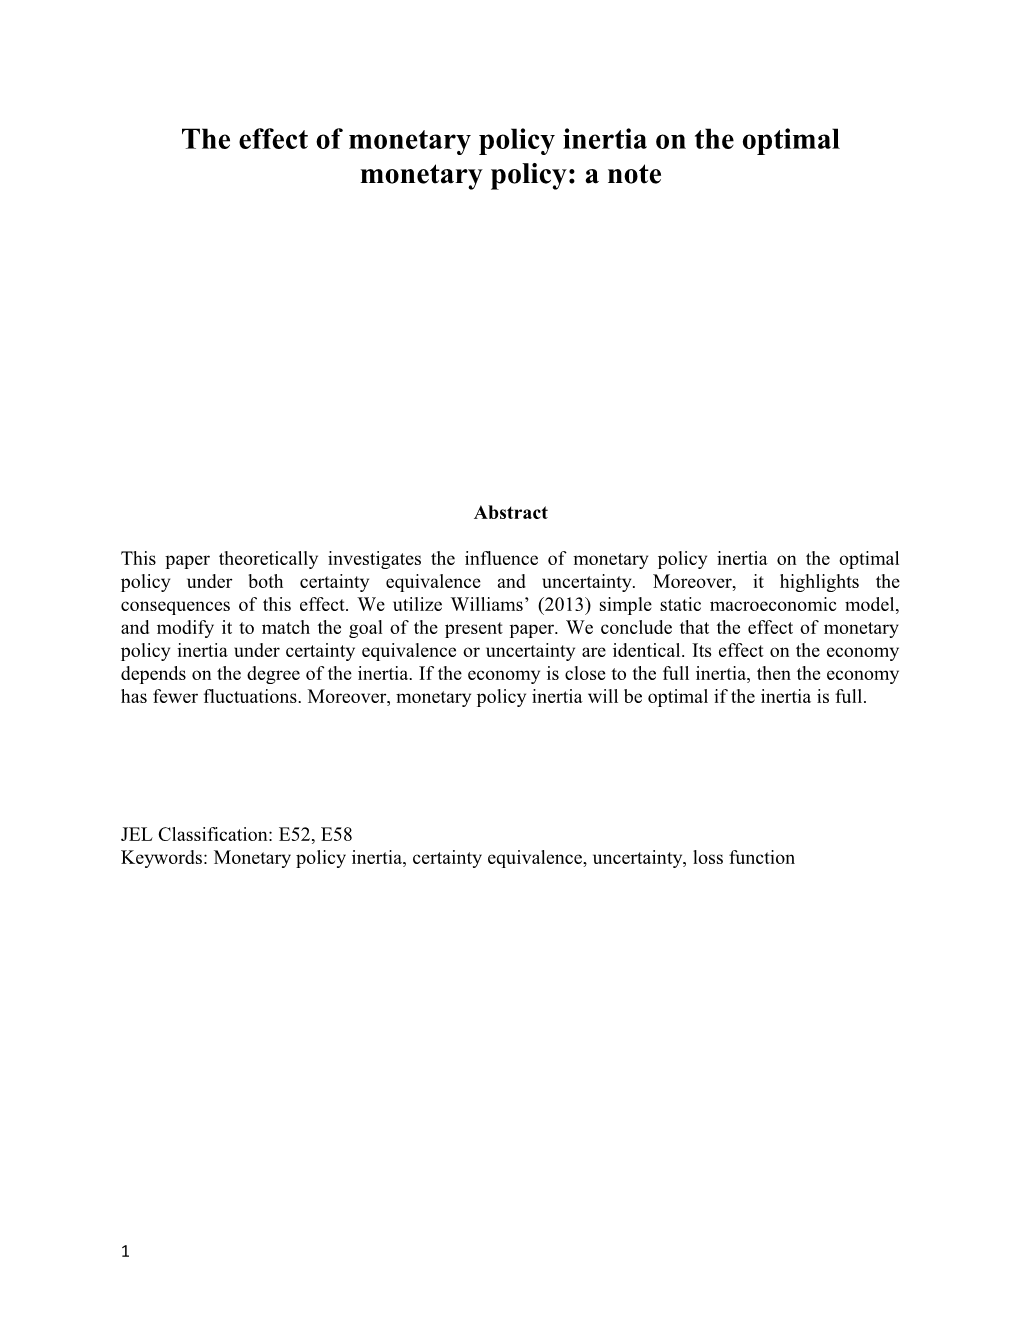 The Effect of Monetary Policy Inertia on the Optimal Monetary Policy: a Note